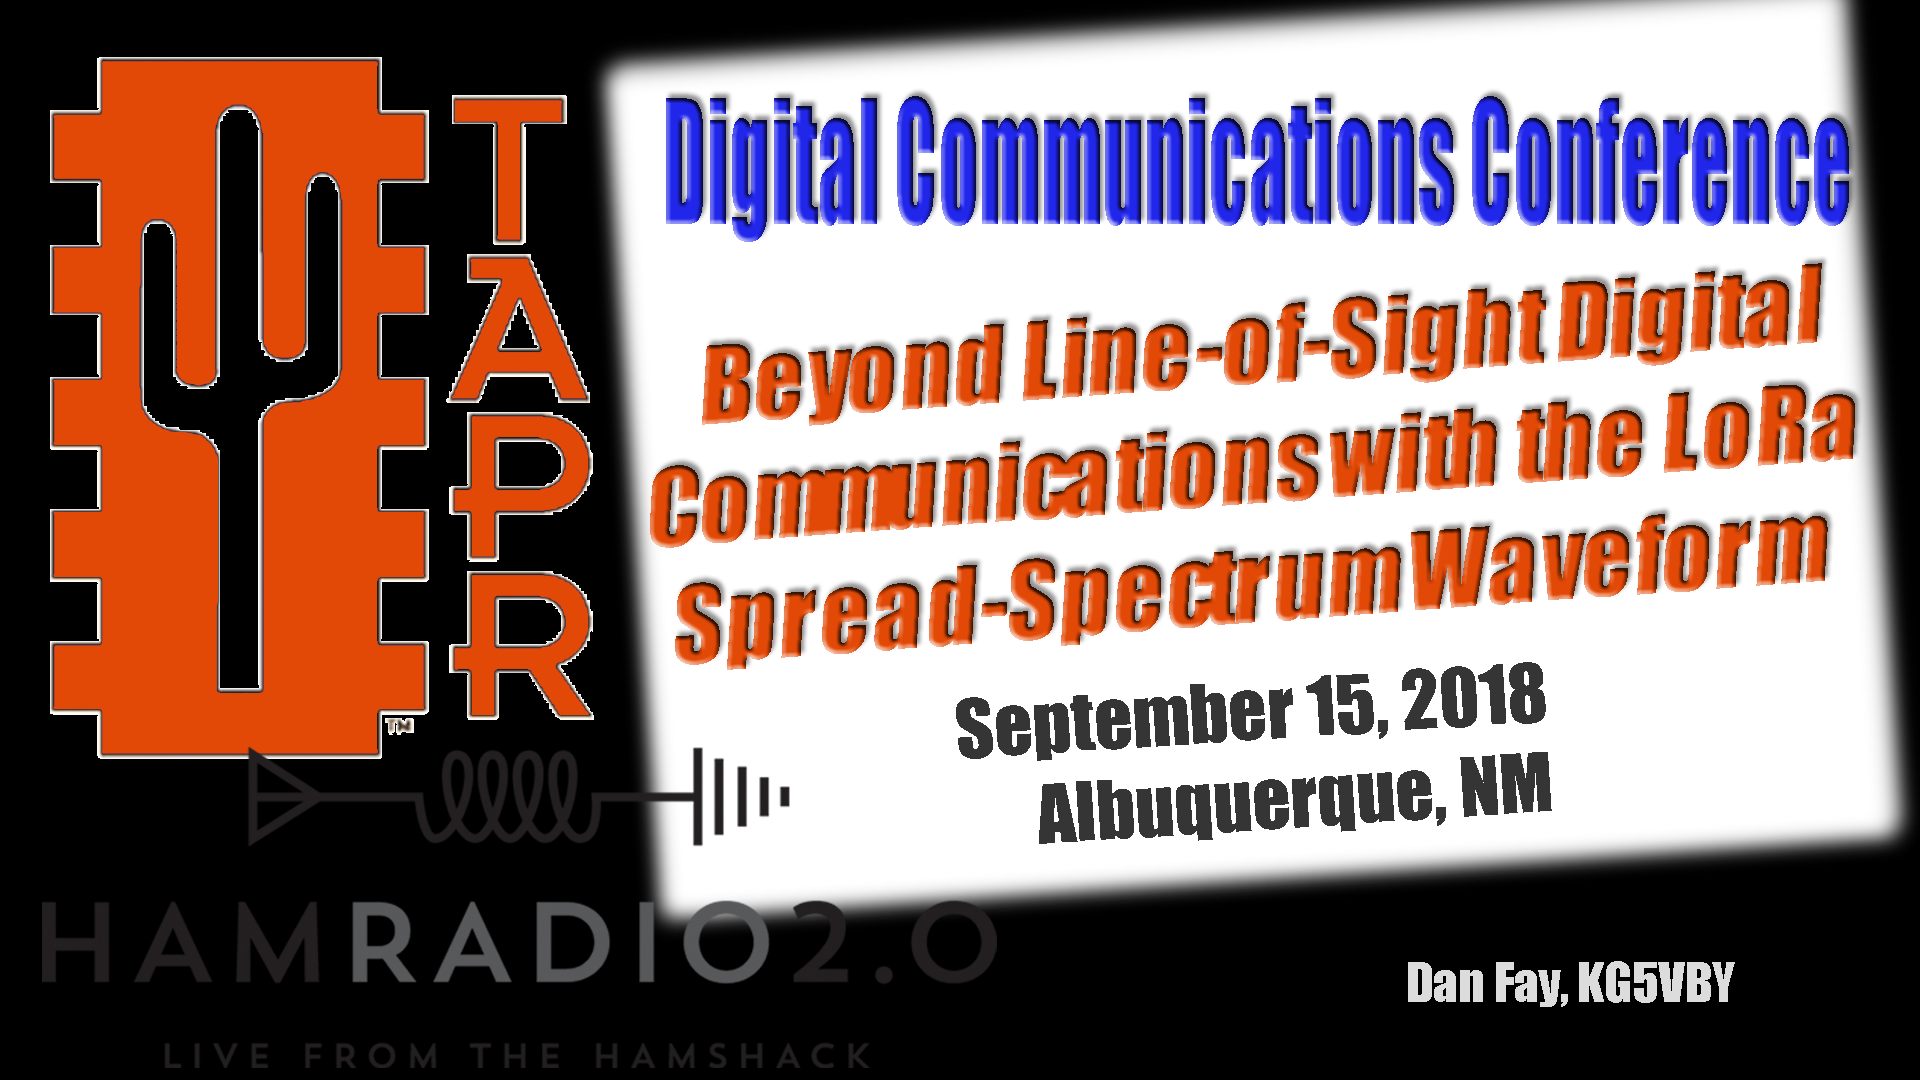 Episode 187: Beyond Line-of-Sight Digital Communications with the LoRa Spread-Spectrum Waveform